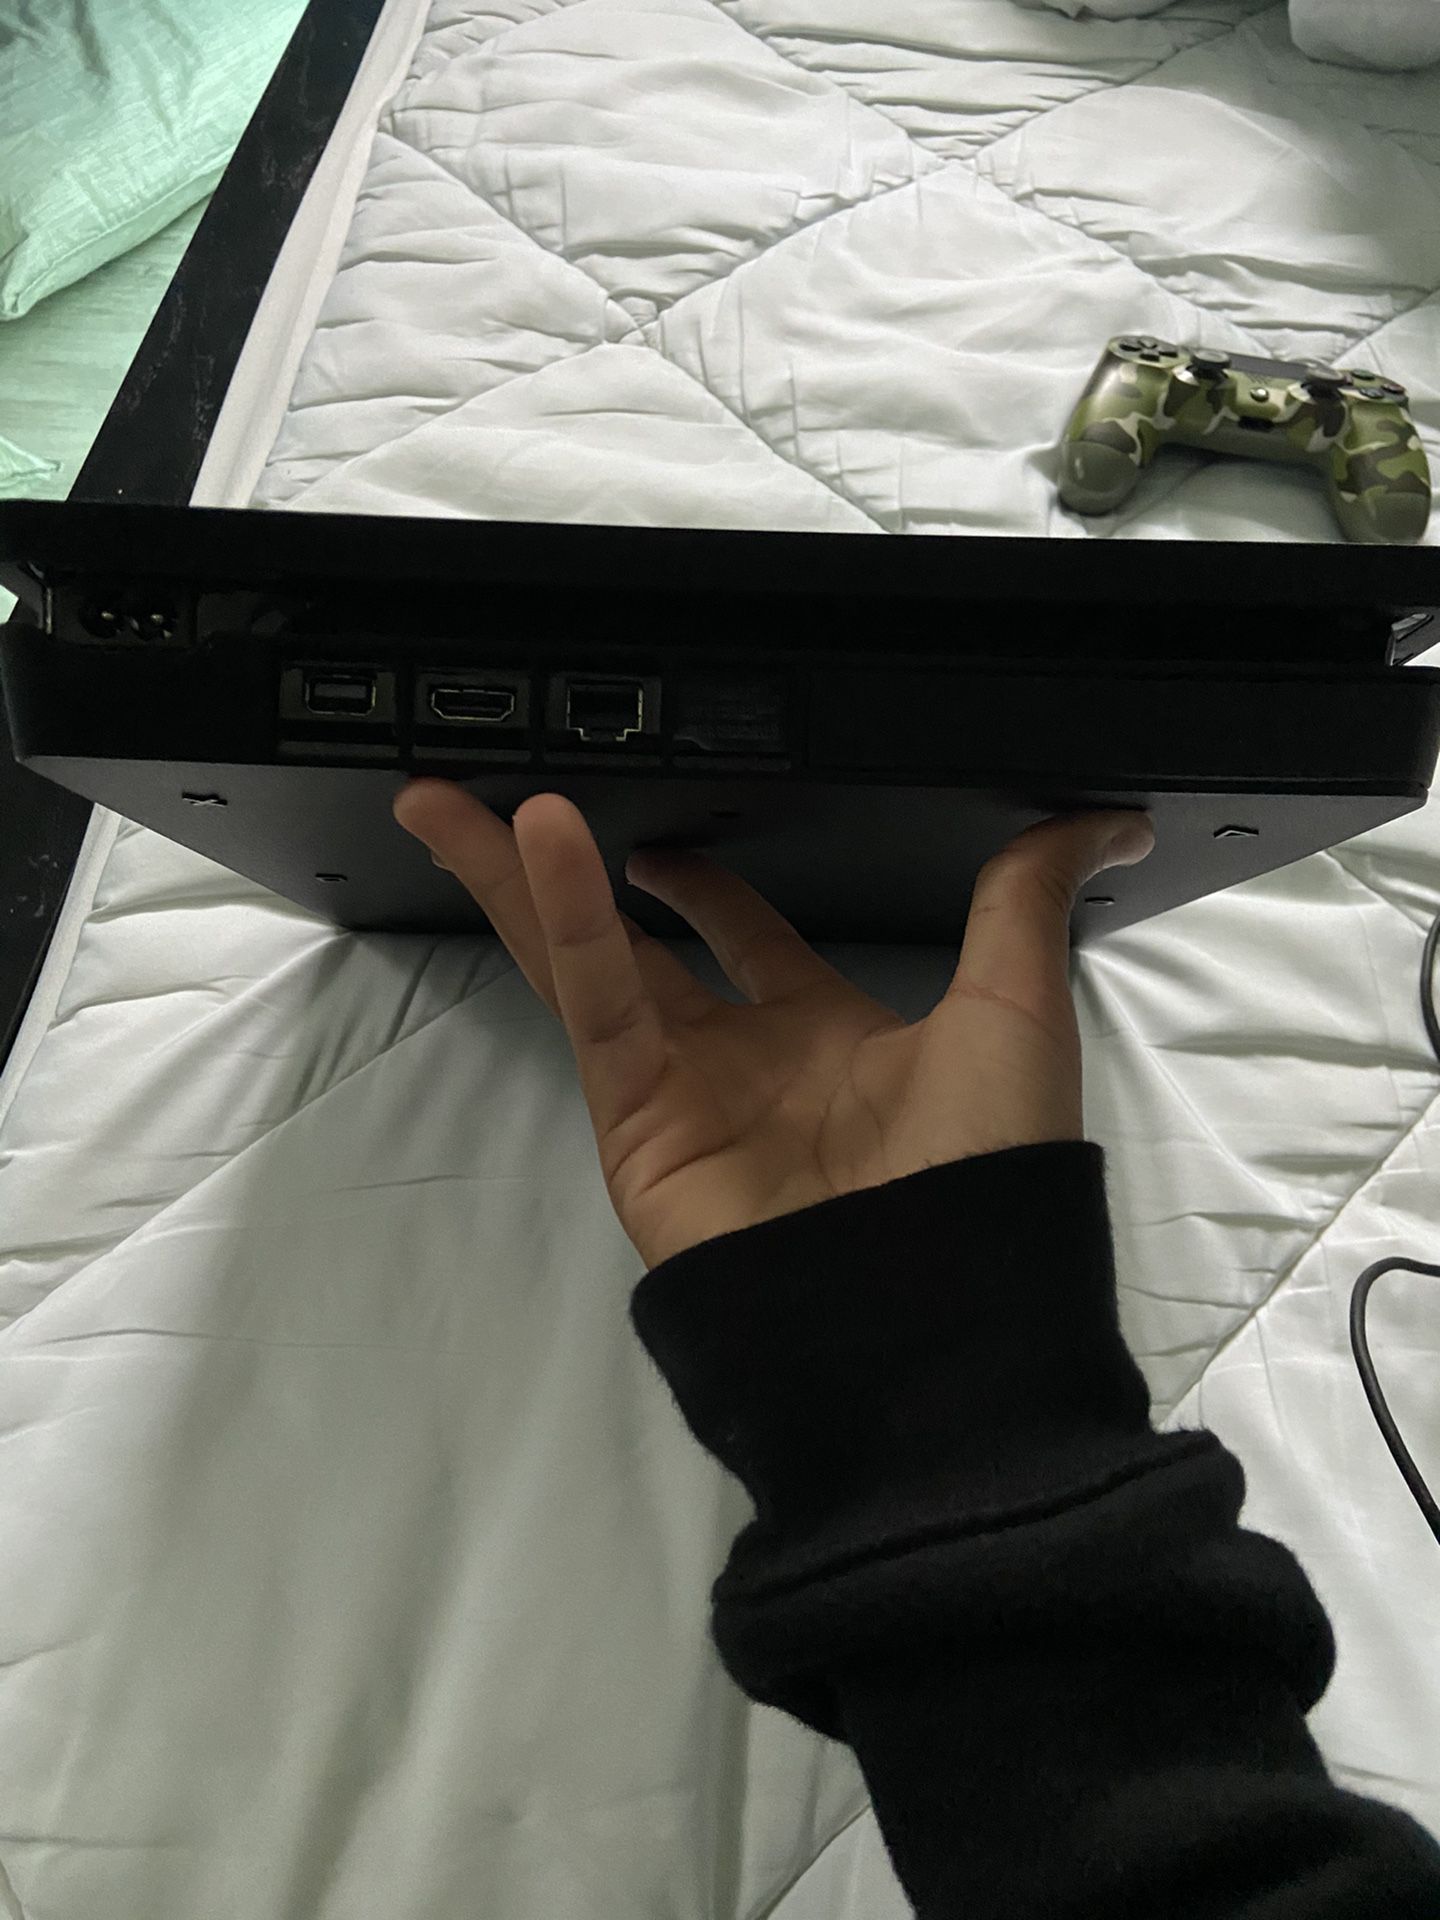 Ps4 good condition